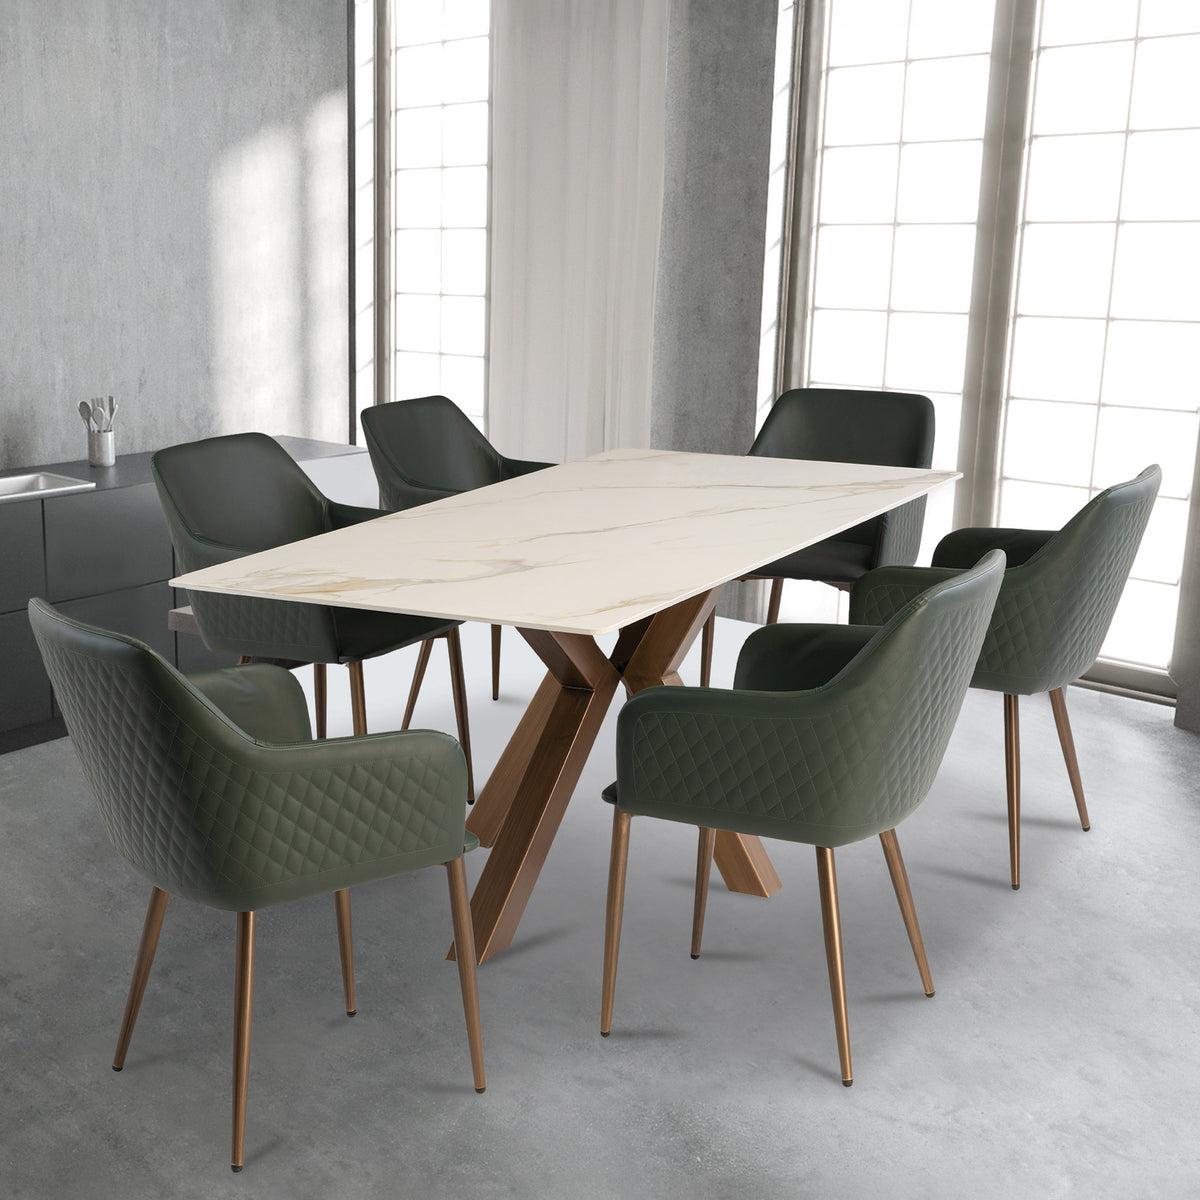 Bowman White & Gold 180cm Sintered Stone Dining Table for dining room